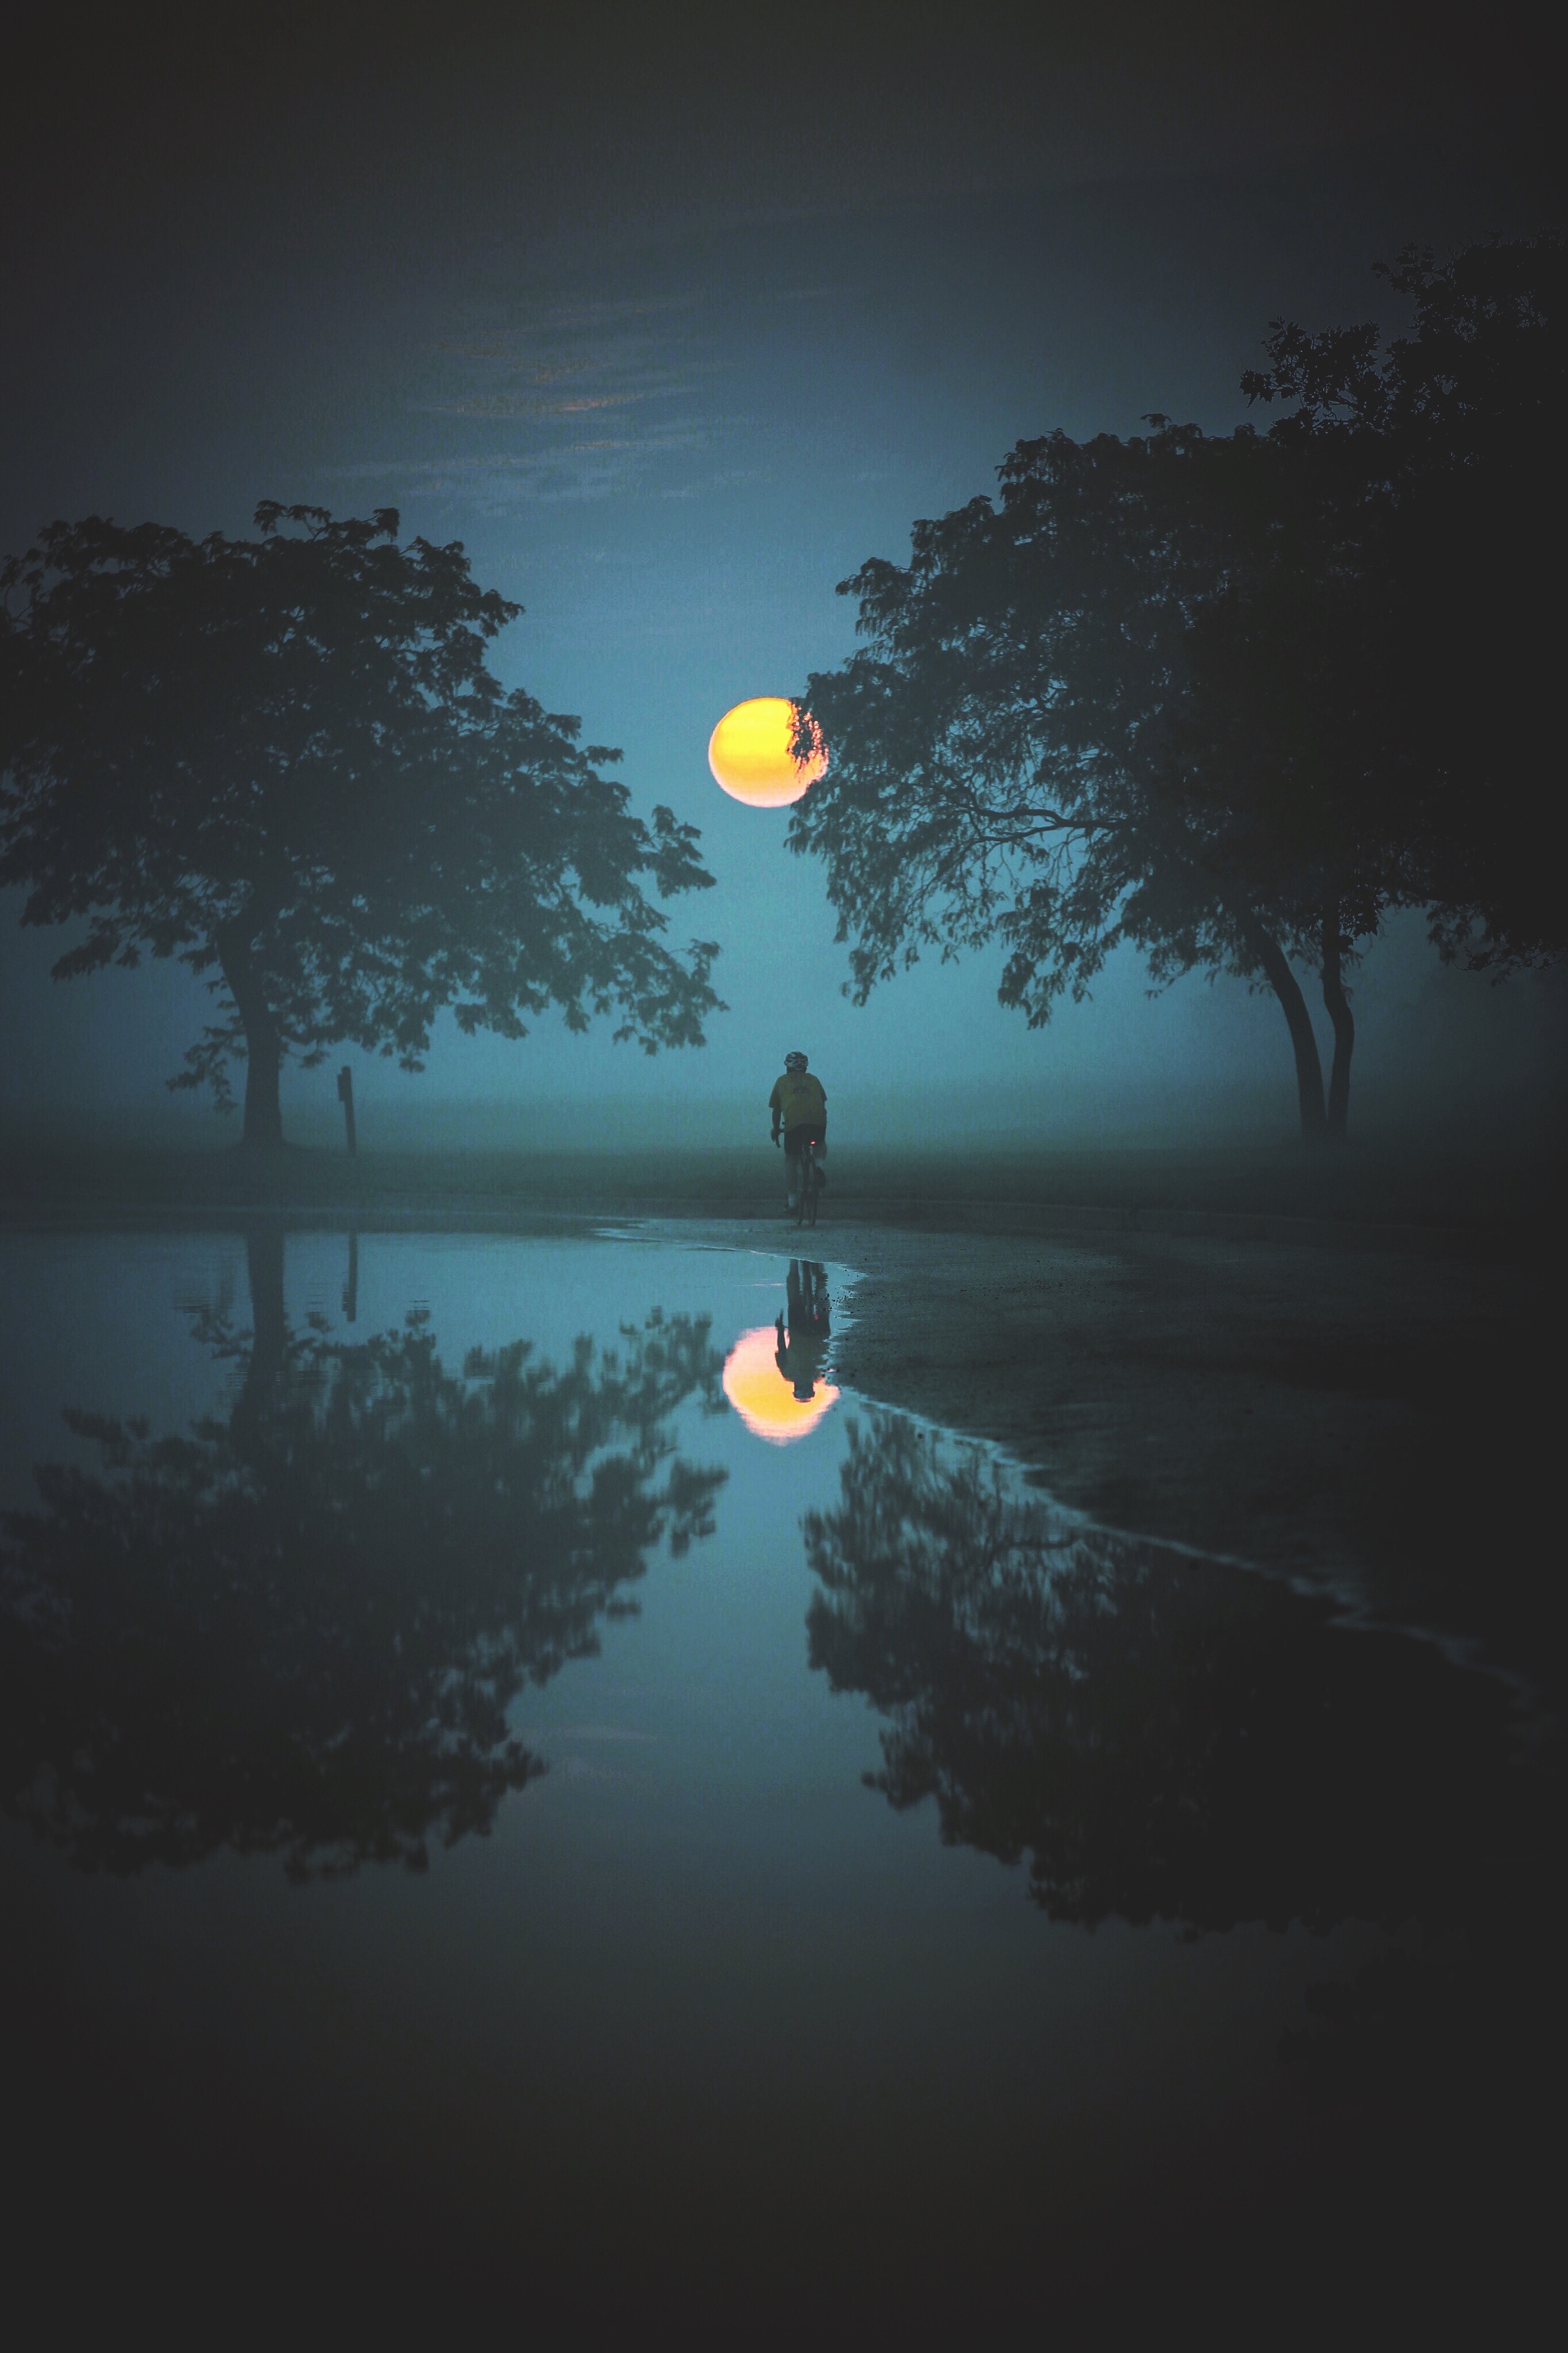 reflection, moon, cyclist, fog, nature, trees, water